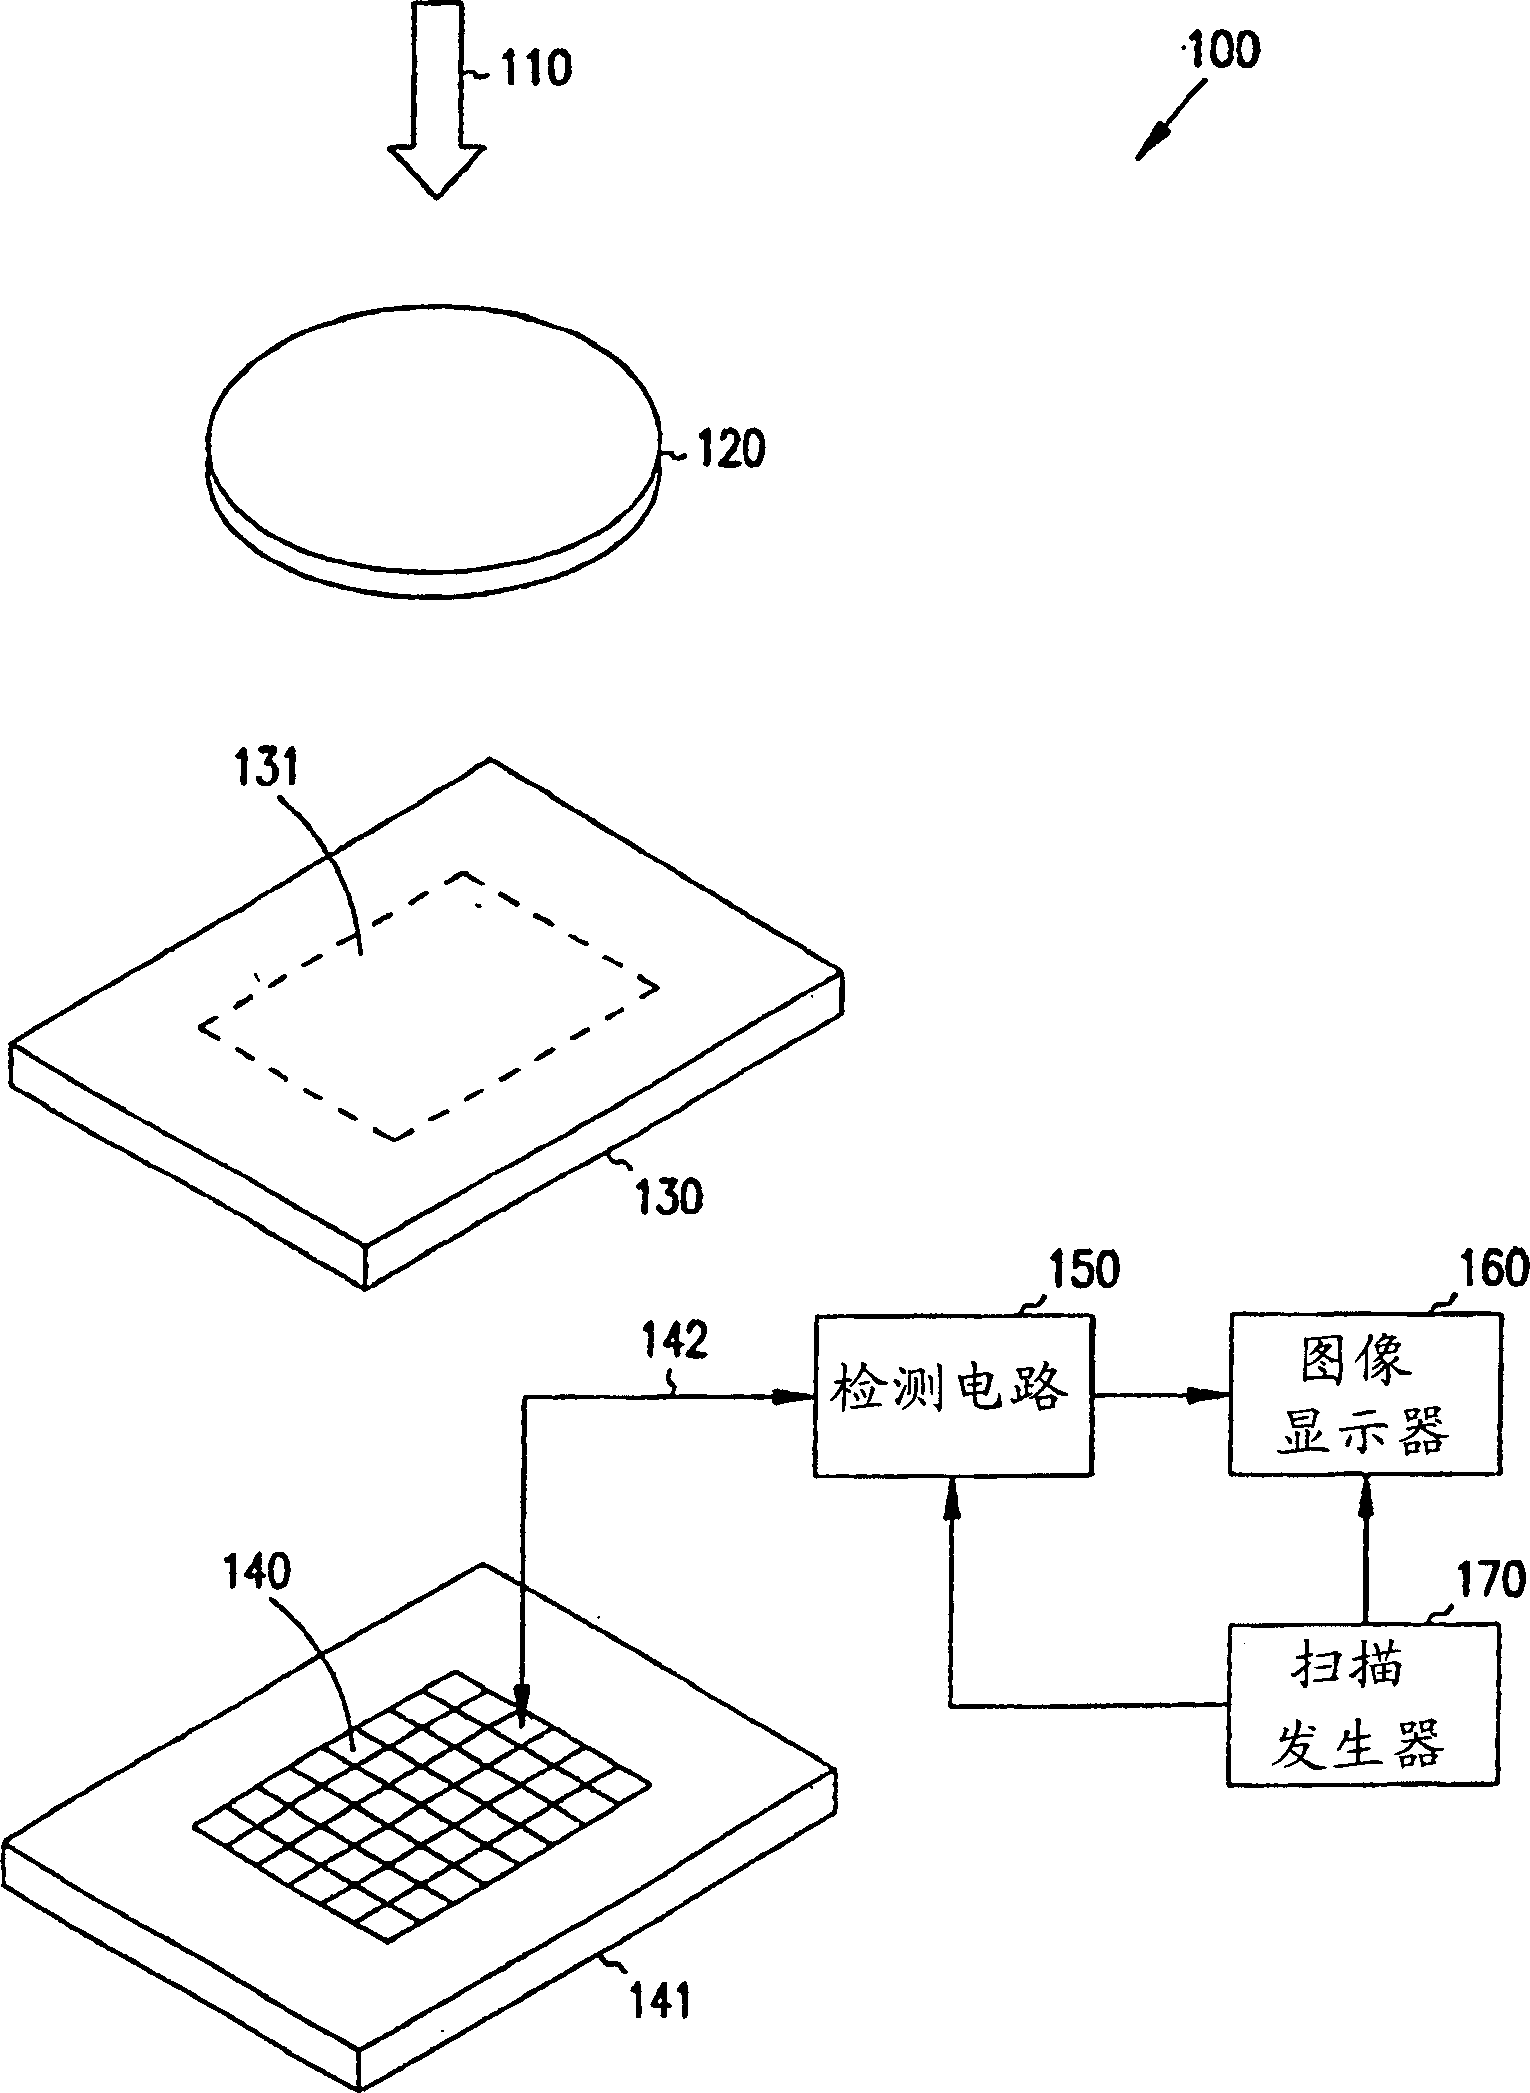 High-absorption wide-band pixel for bolometer arrays